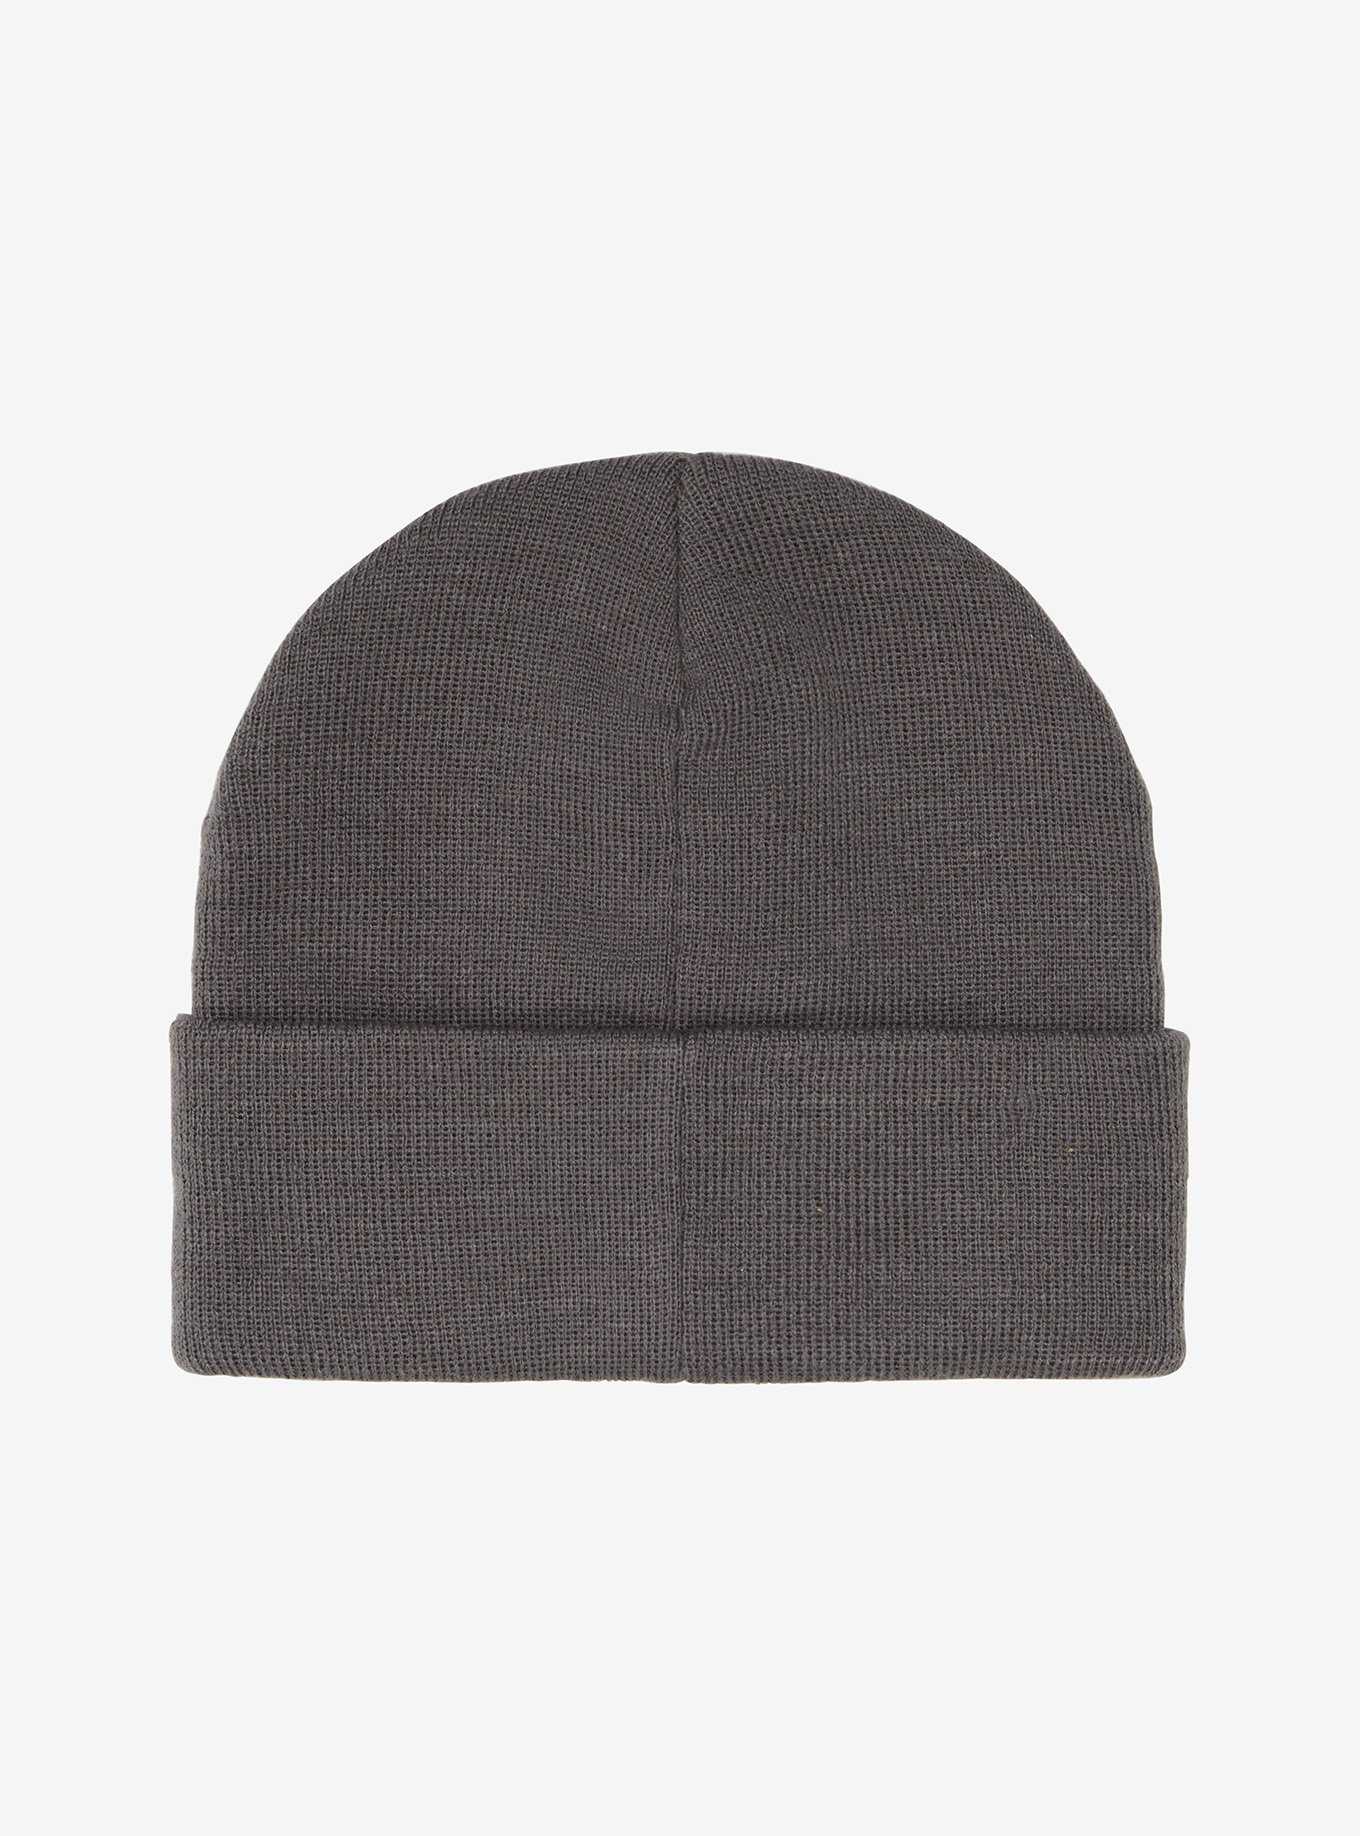 Cool Beanies: Slouchy, Trendy BoxLunch Beanies & Pop Culture 